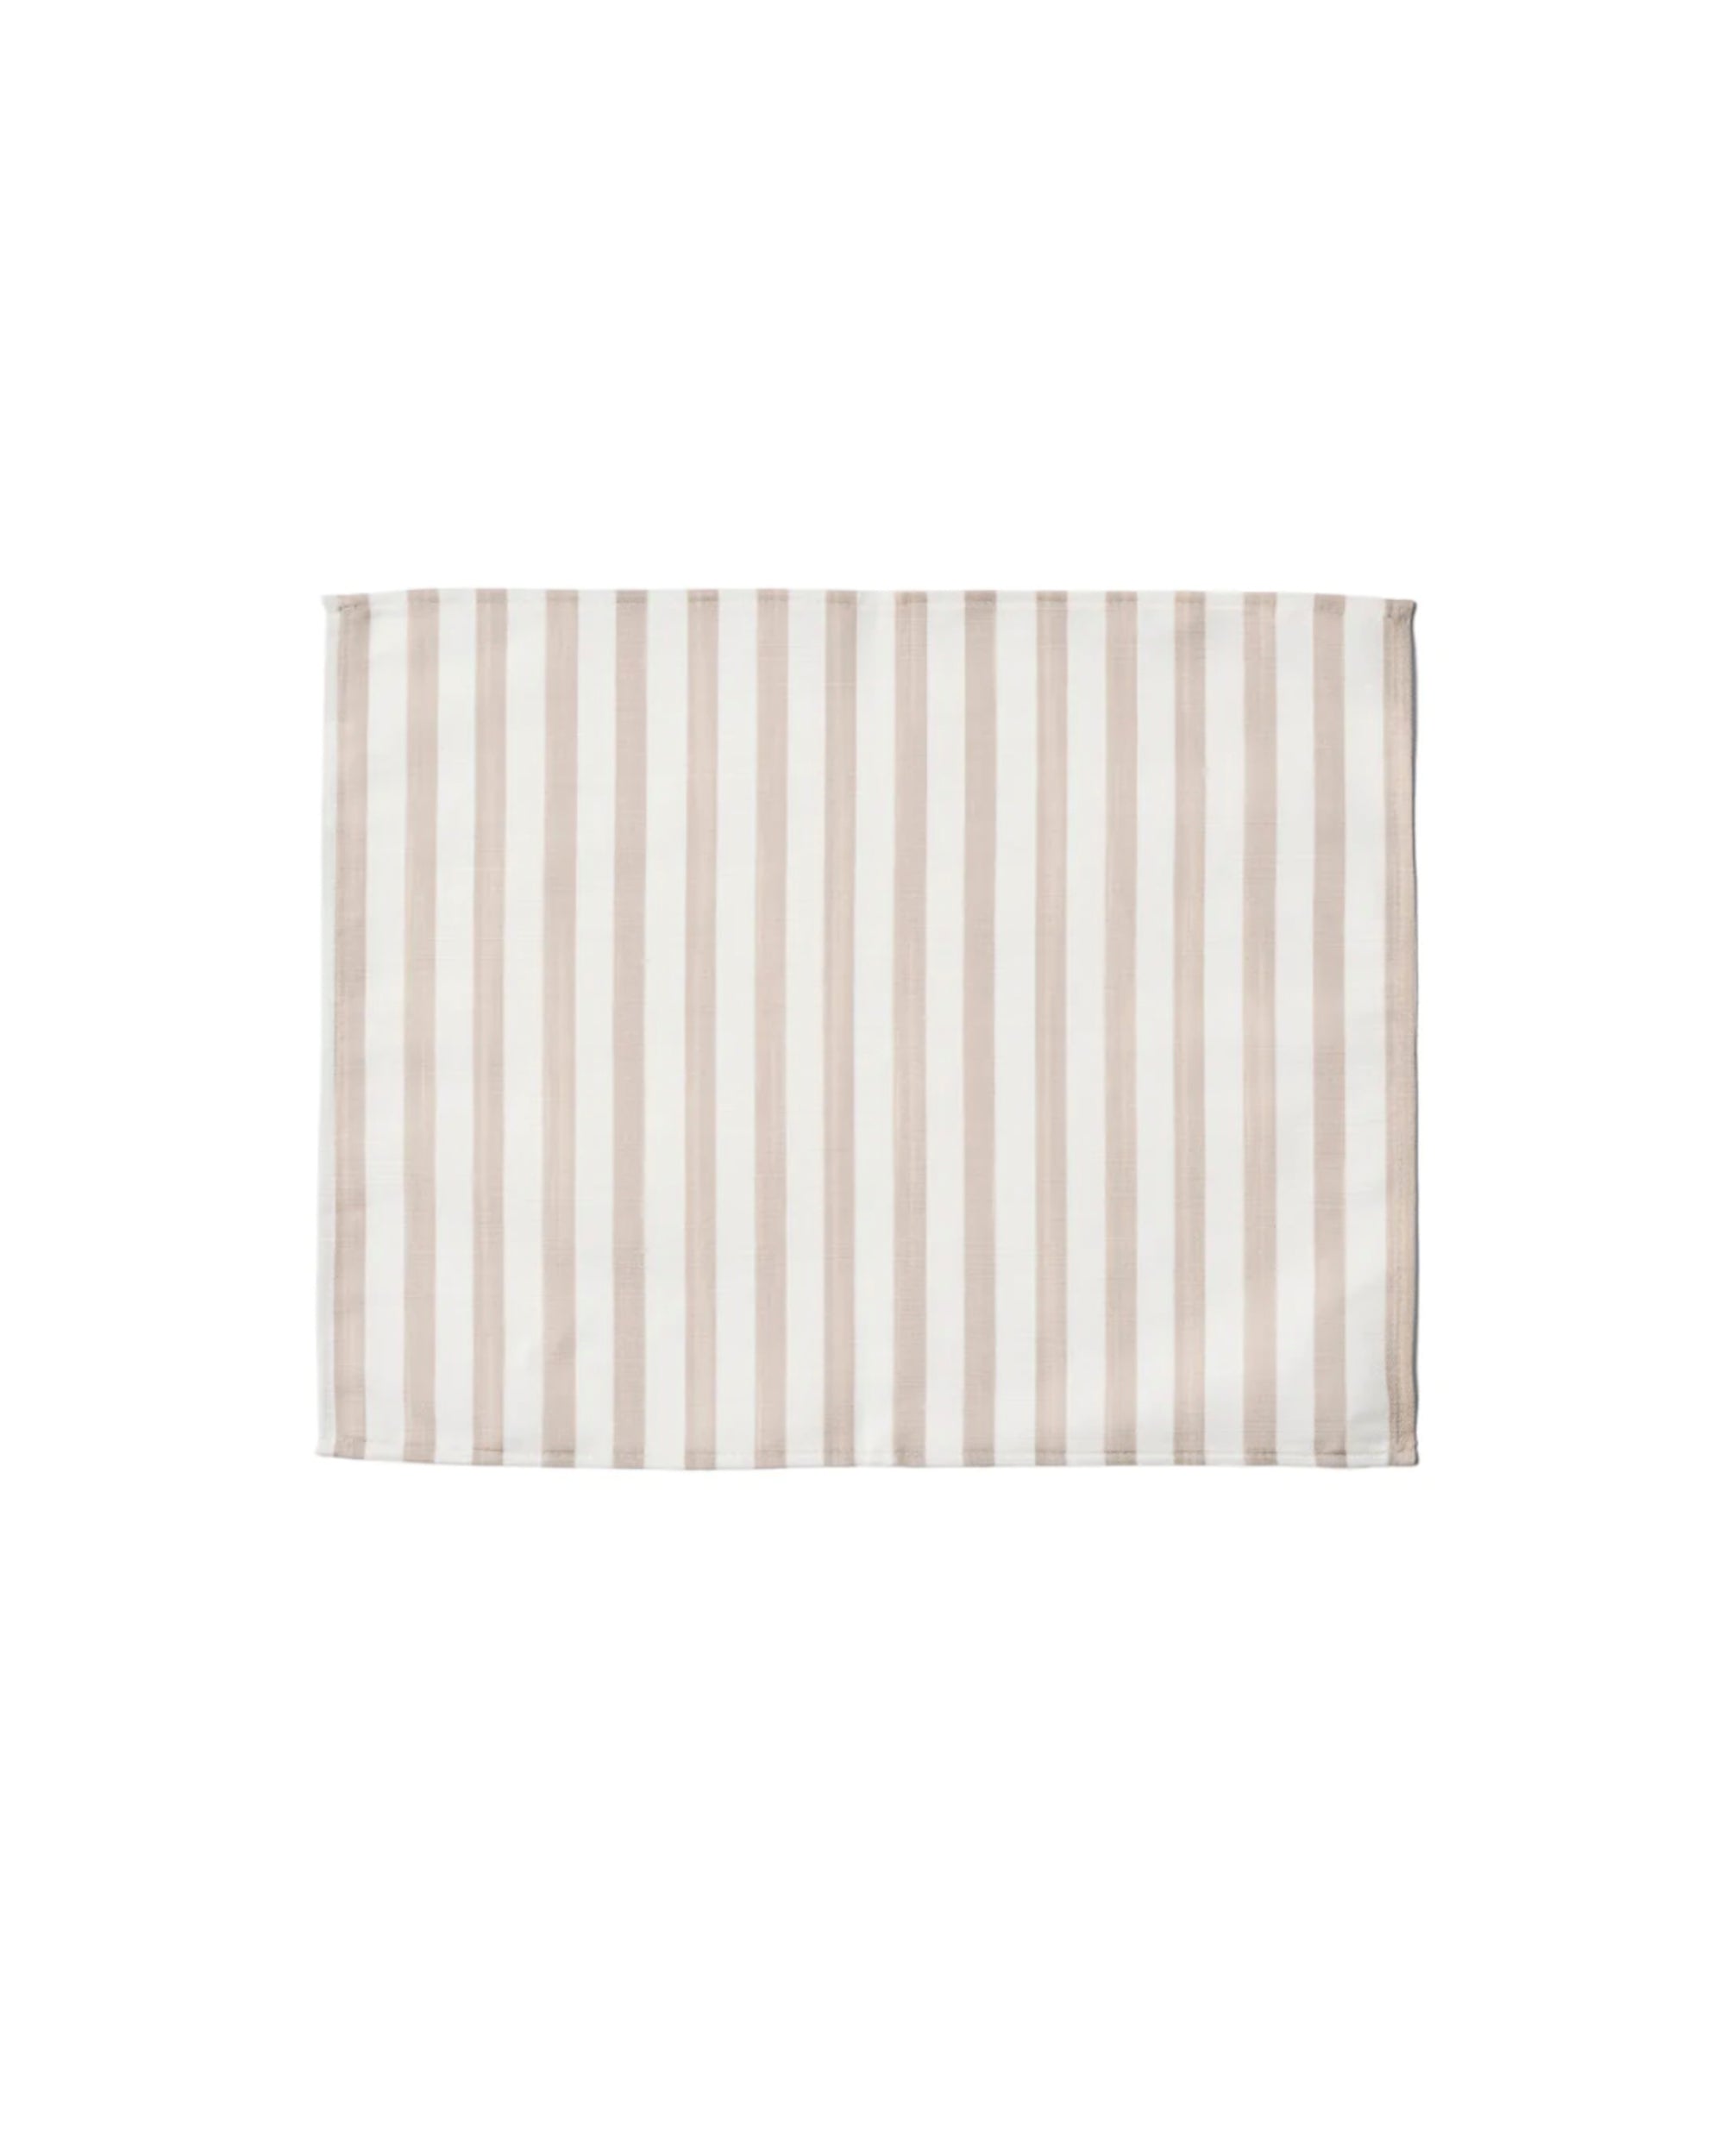 Striped Placemats 40 x 30 cm Set of 2